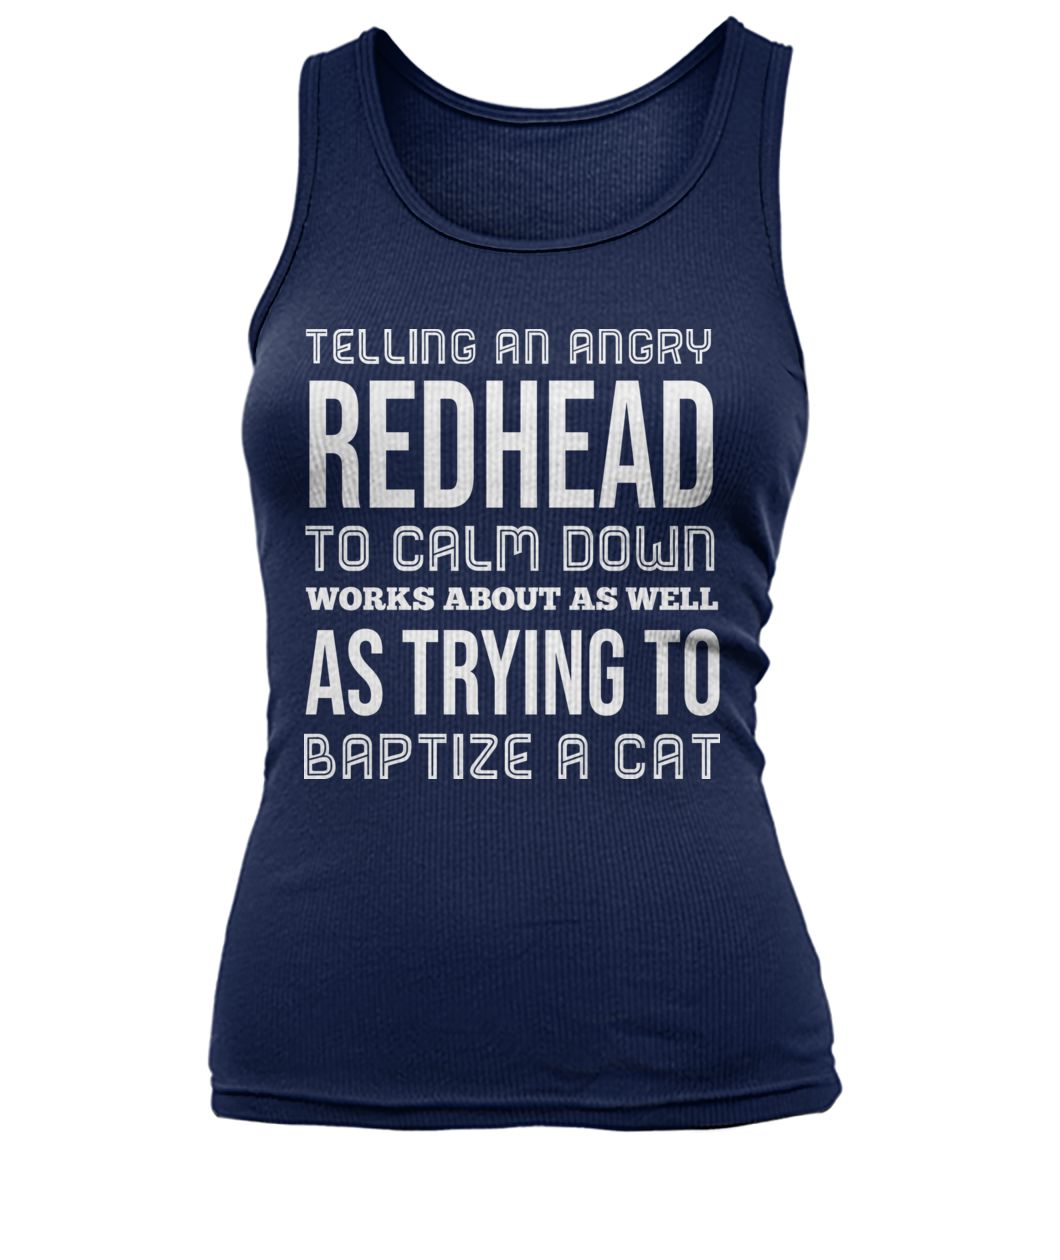 Telling an angry redhead to calm down works about as well as trying to baptize a cat women's tank top